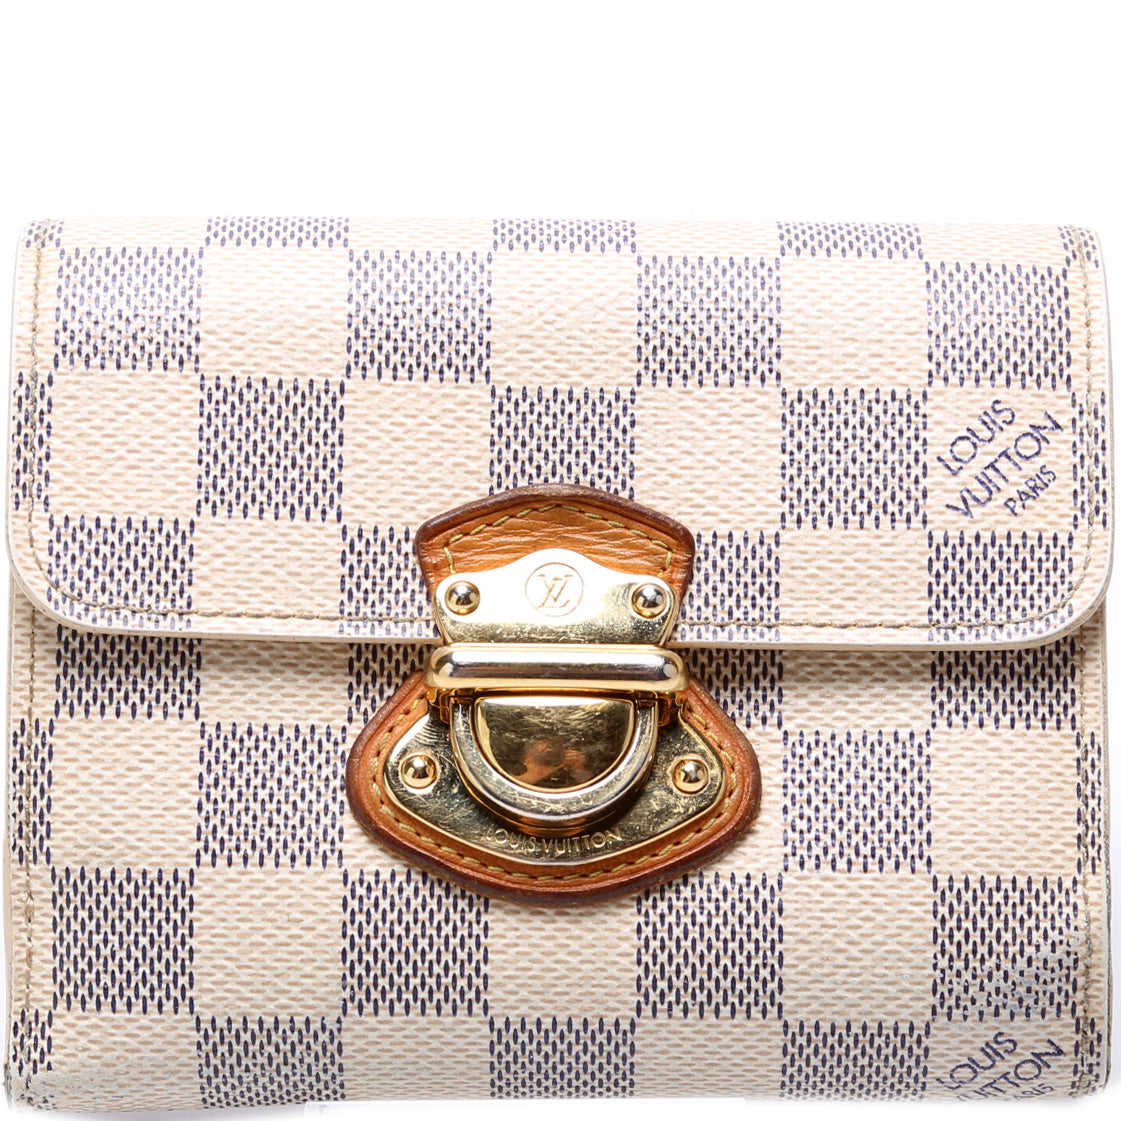 Sold at Auction: LOUIS VUITTON DAMIER JOEY WALLET